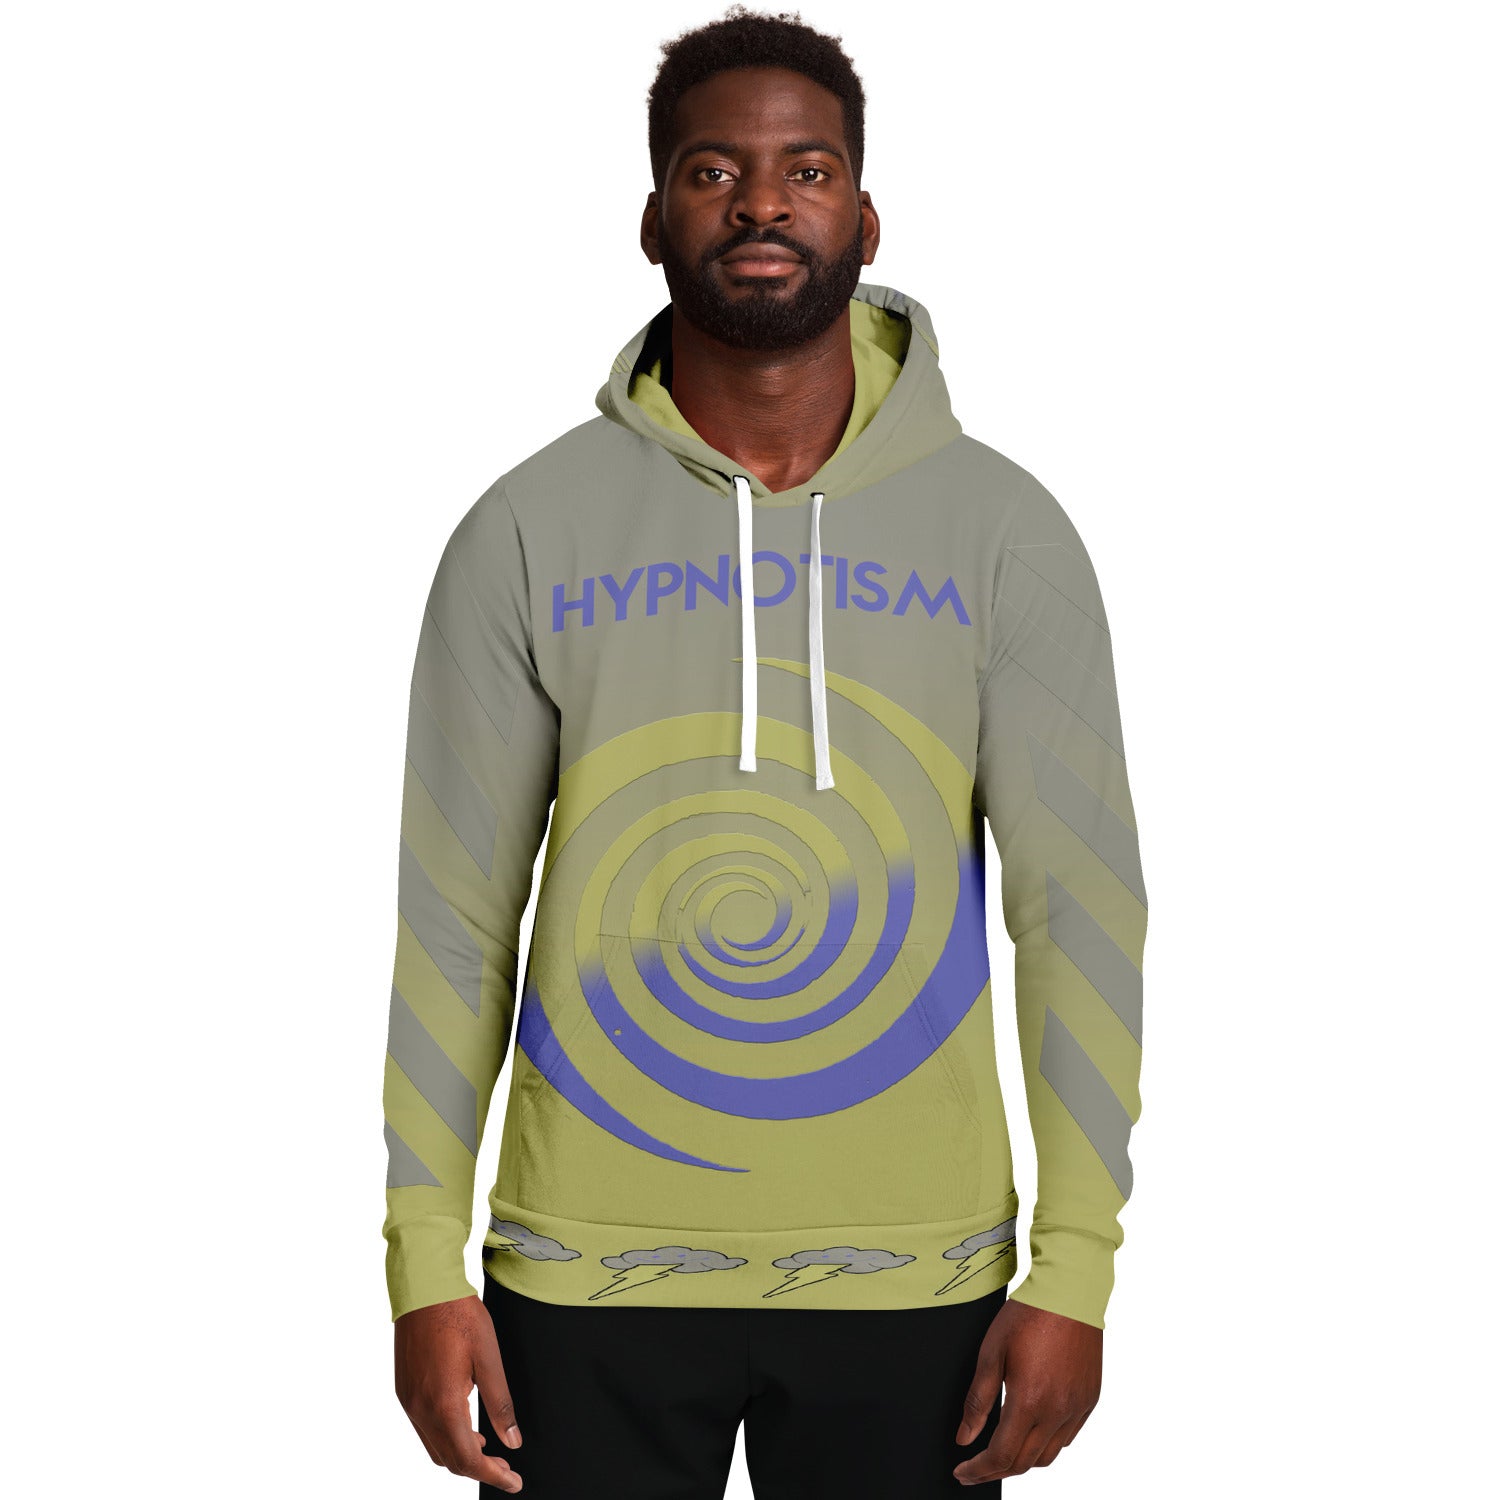 Hypnotism Last Place Hoodie - The Columbian Exchange Group